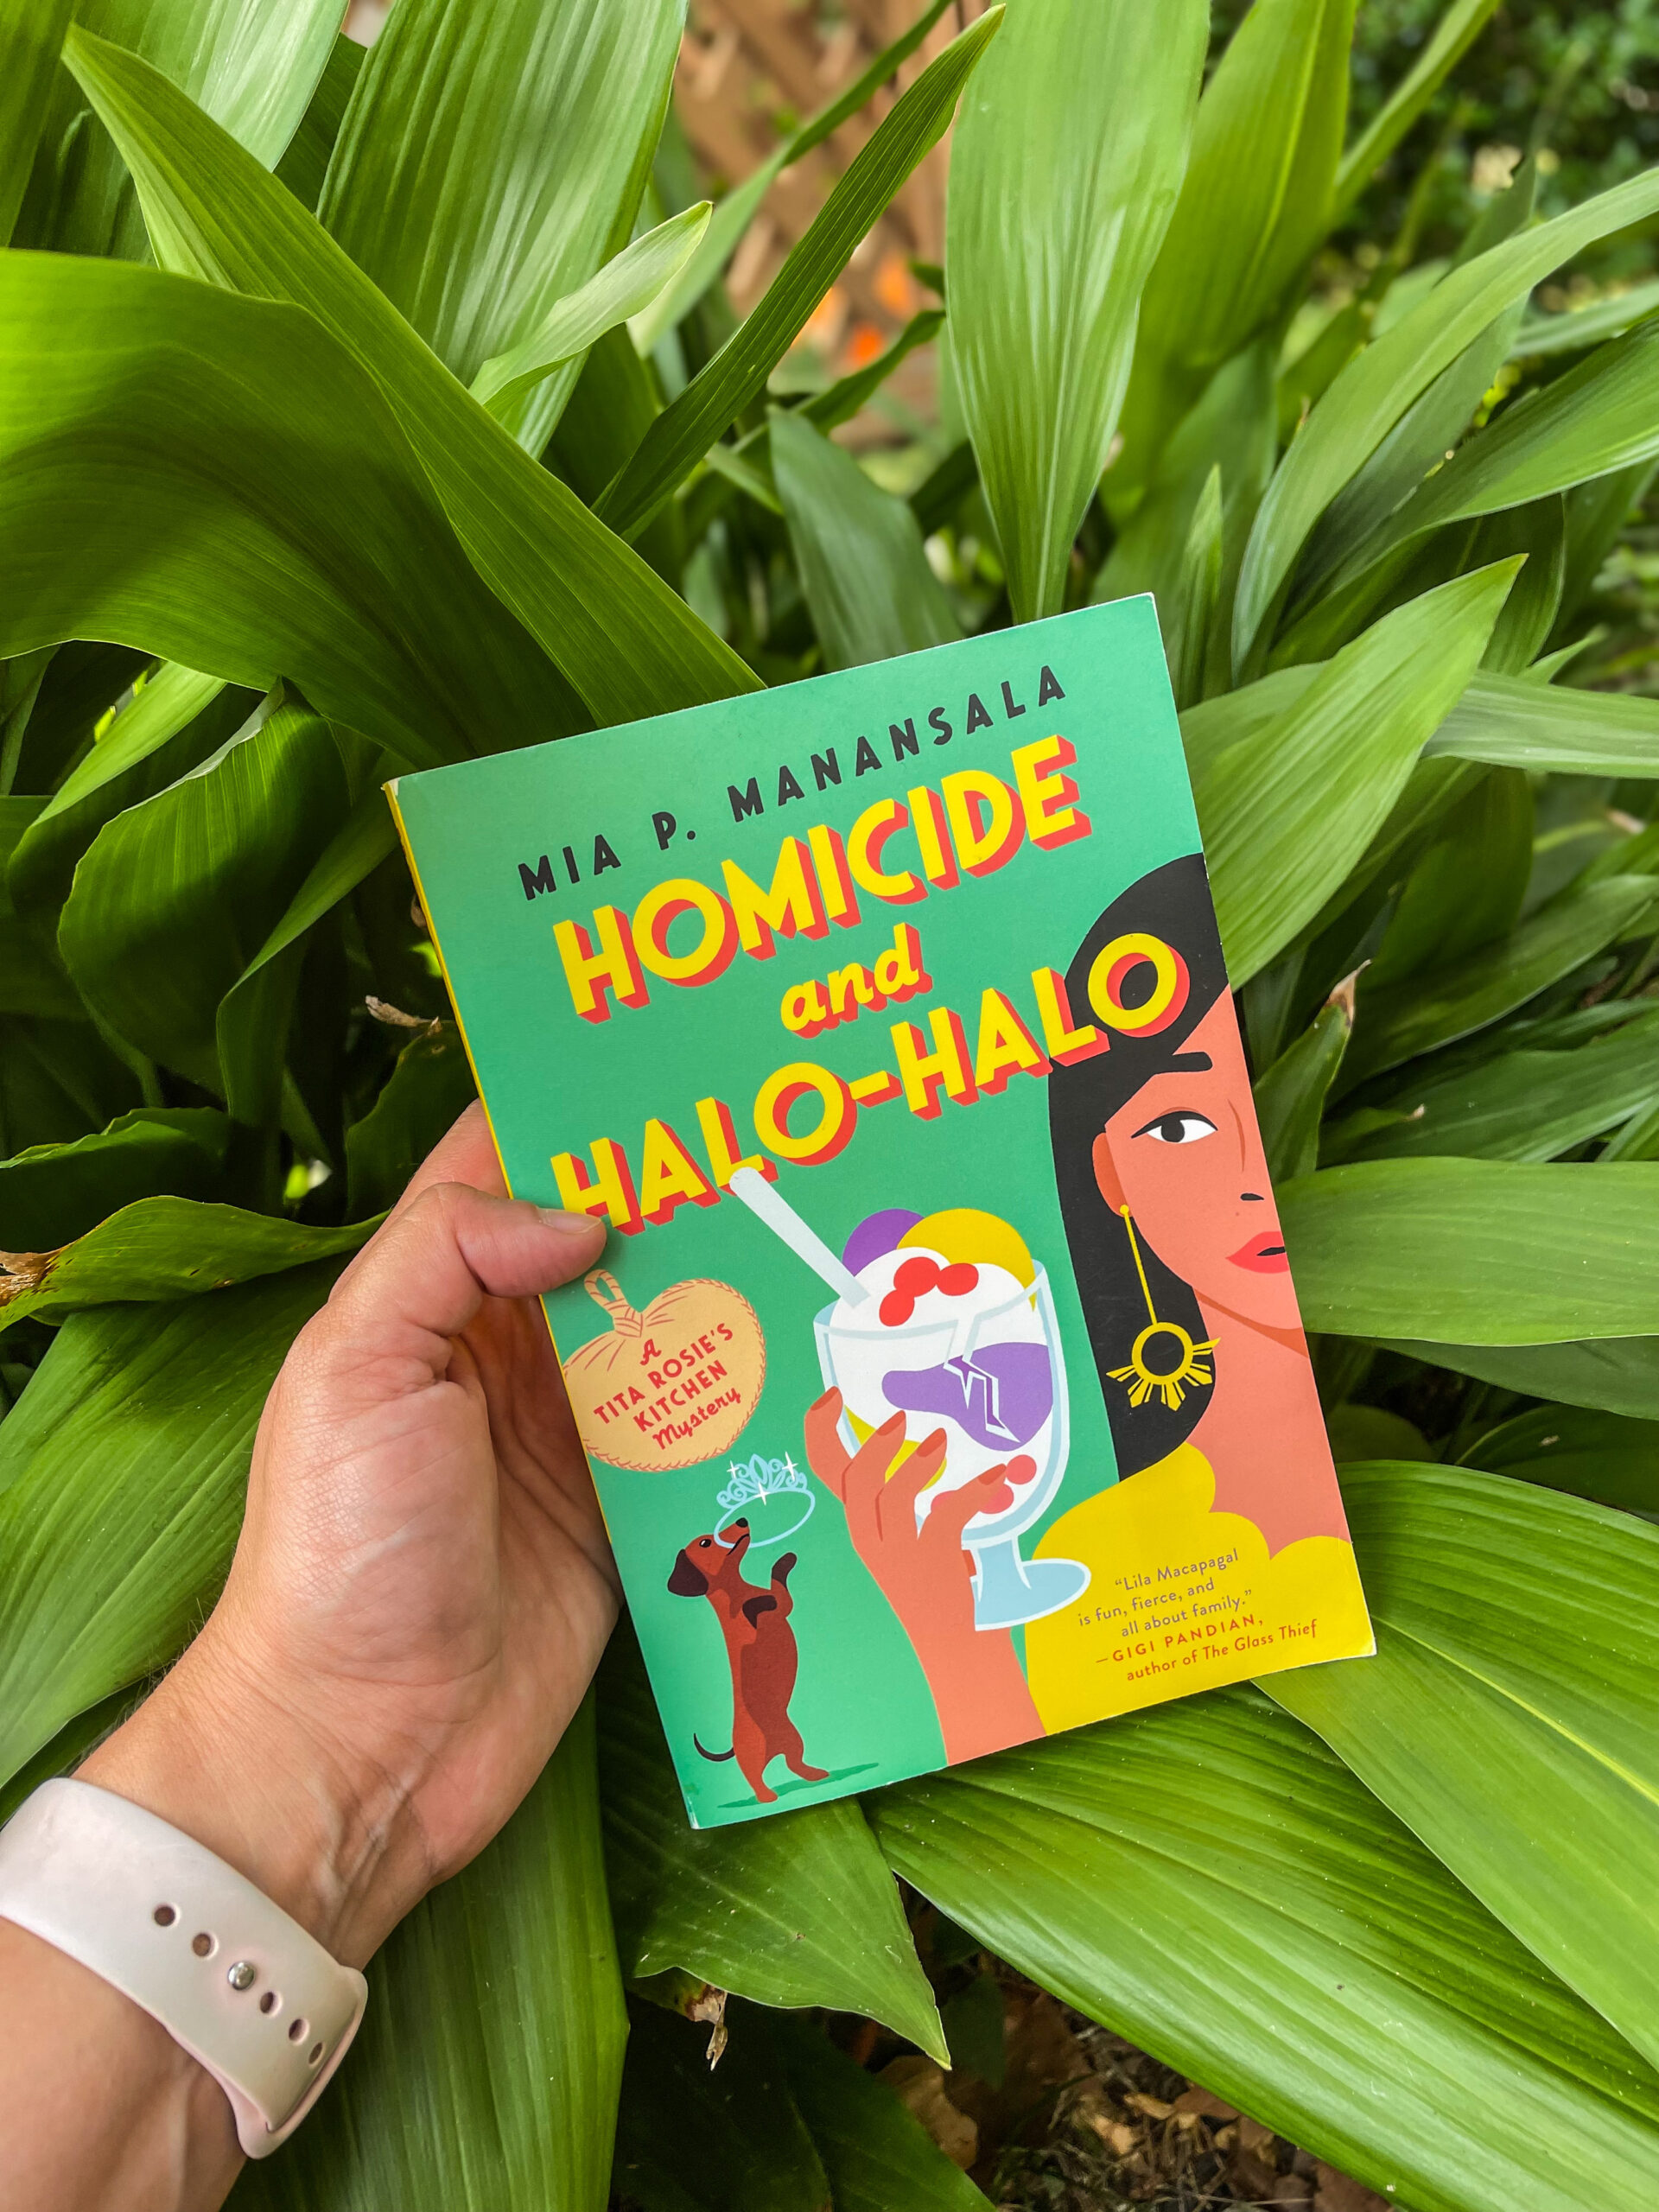 Homicide and Halo-Halo by Mia